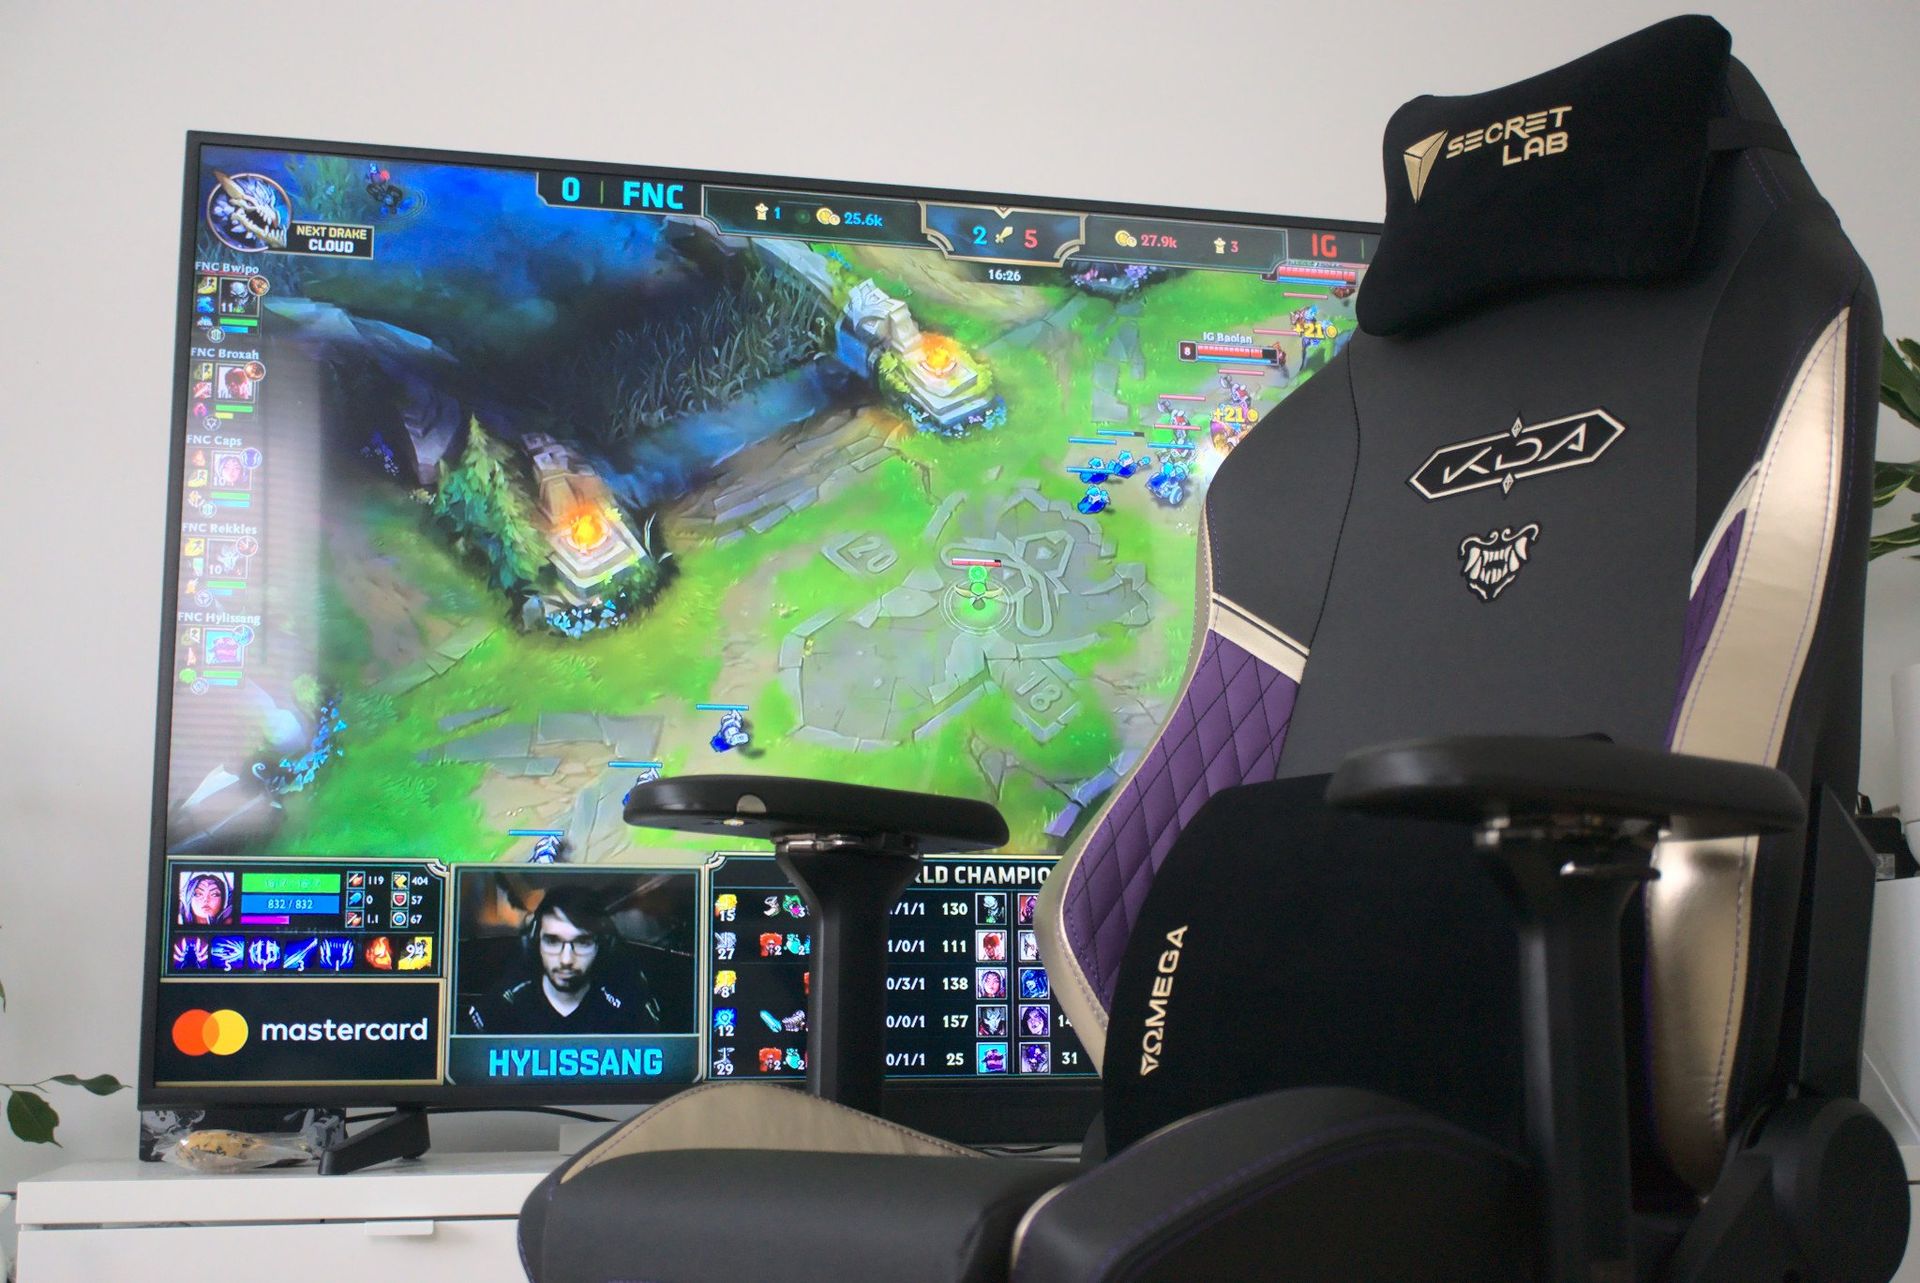 Secretlab League of Legends K/DA Edition gaming chair review: THE perfect teammate for summoner's rift